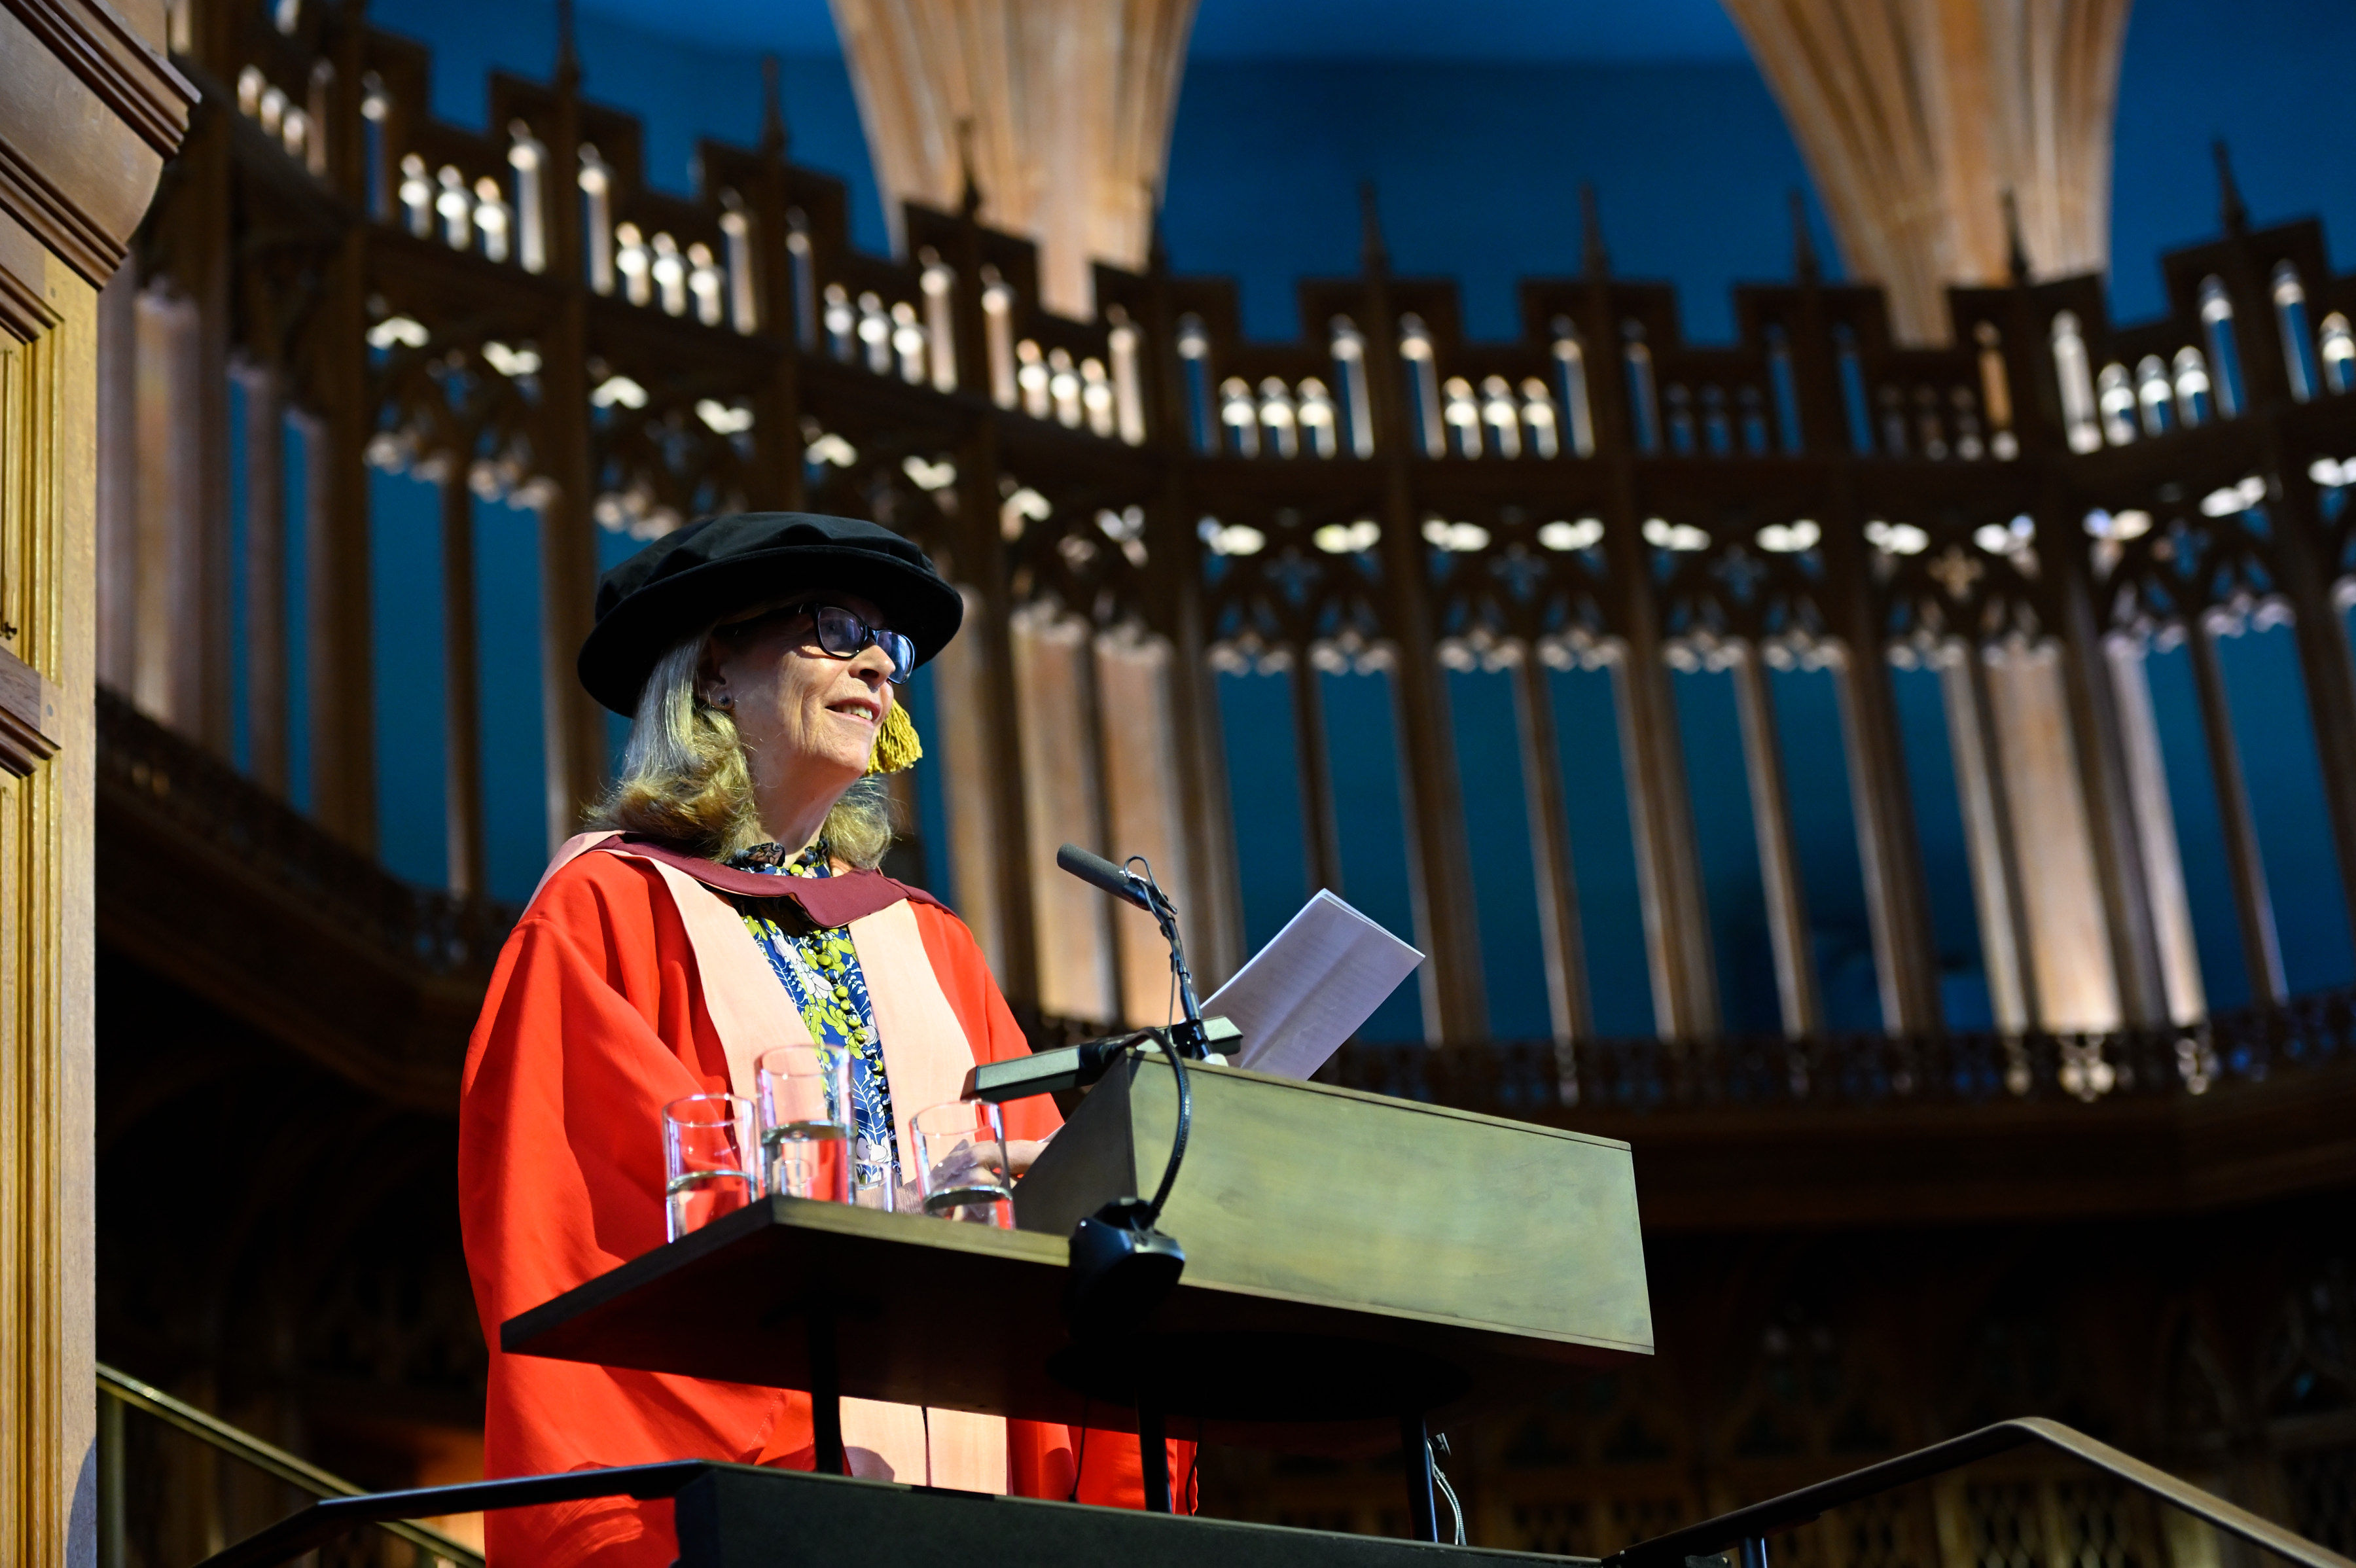 Dr Fane receives her honorary degree